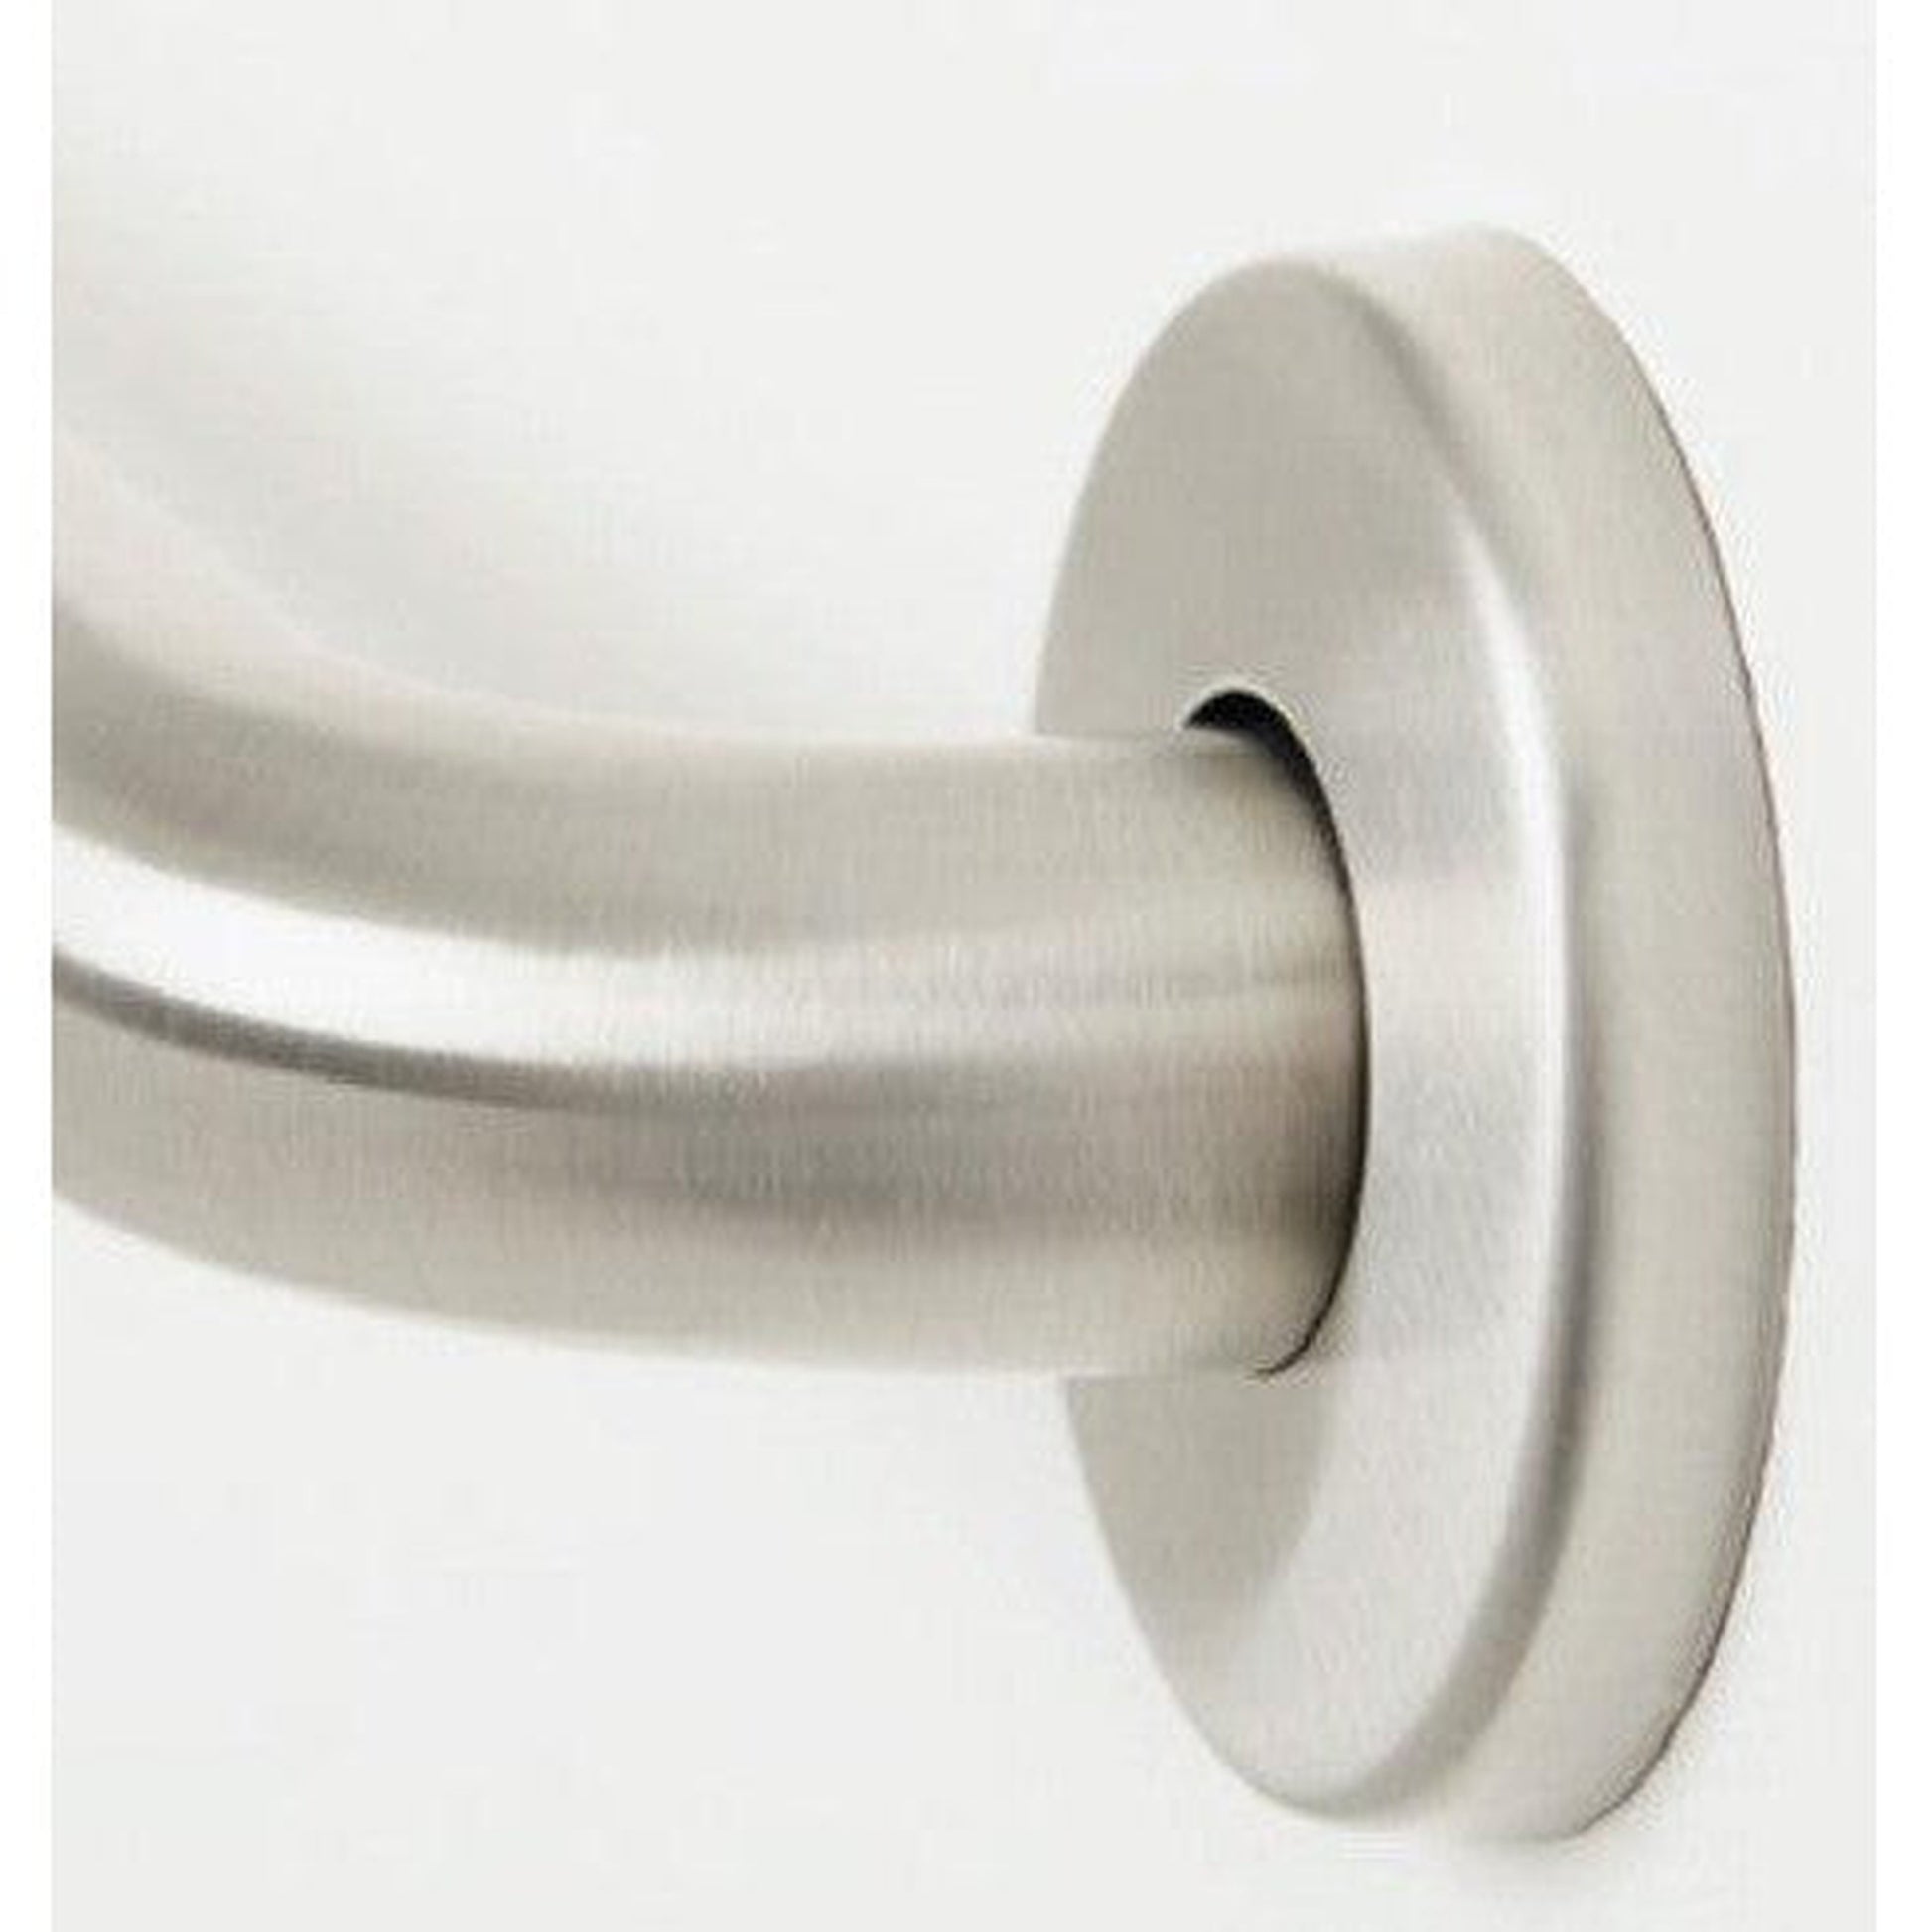 Seachrome Signature Series 24" x 24" Satin Stainless Steel 1.25" Bar Diameter Concealed Flange Wall-To-Wall Straddle